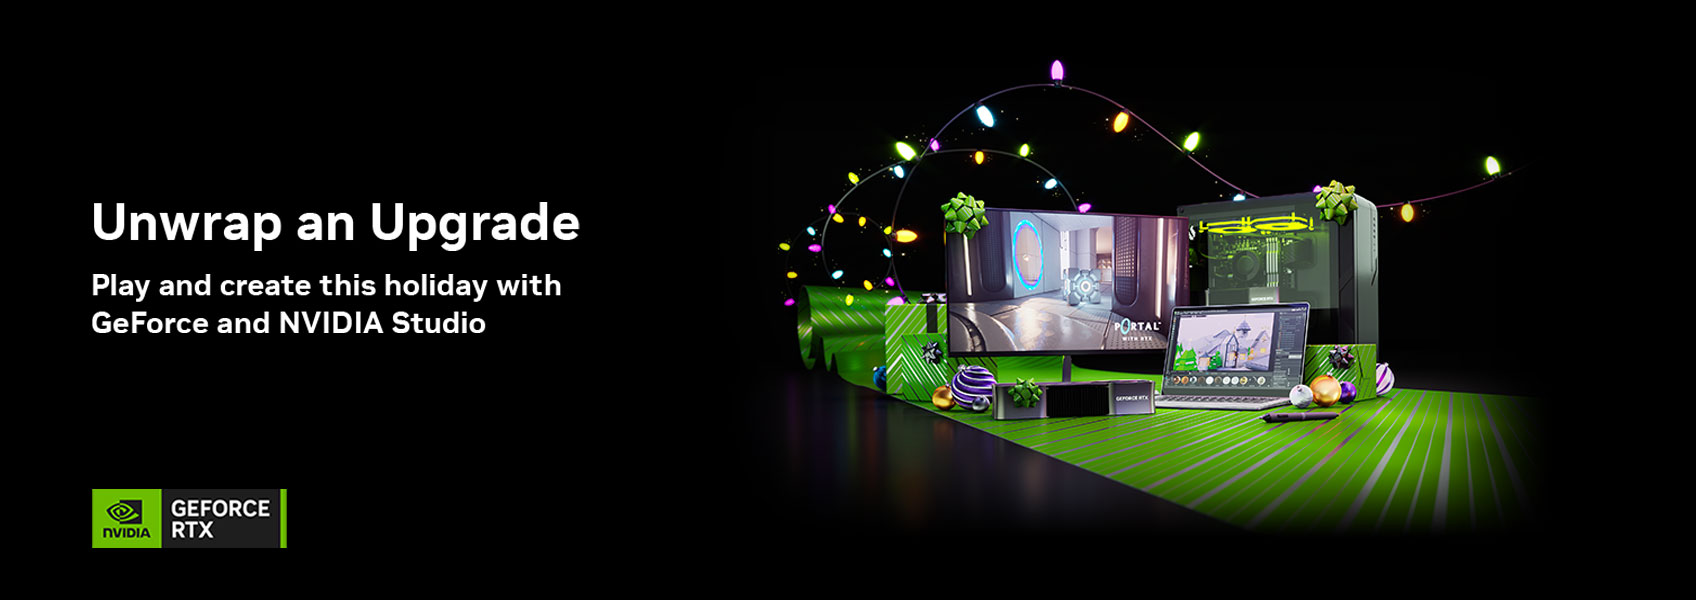 Unwrap an Upgrade. Play and create this holiday with GeForce and NVIDIA Studio